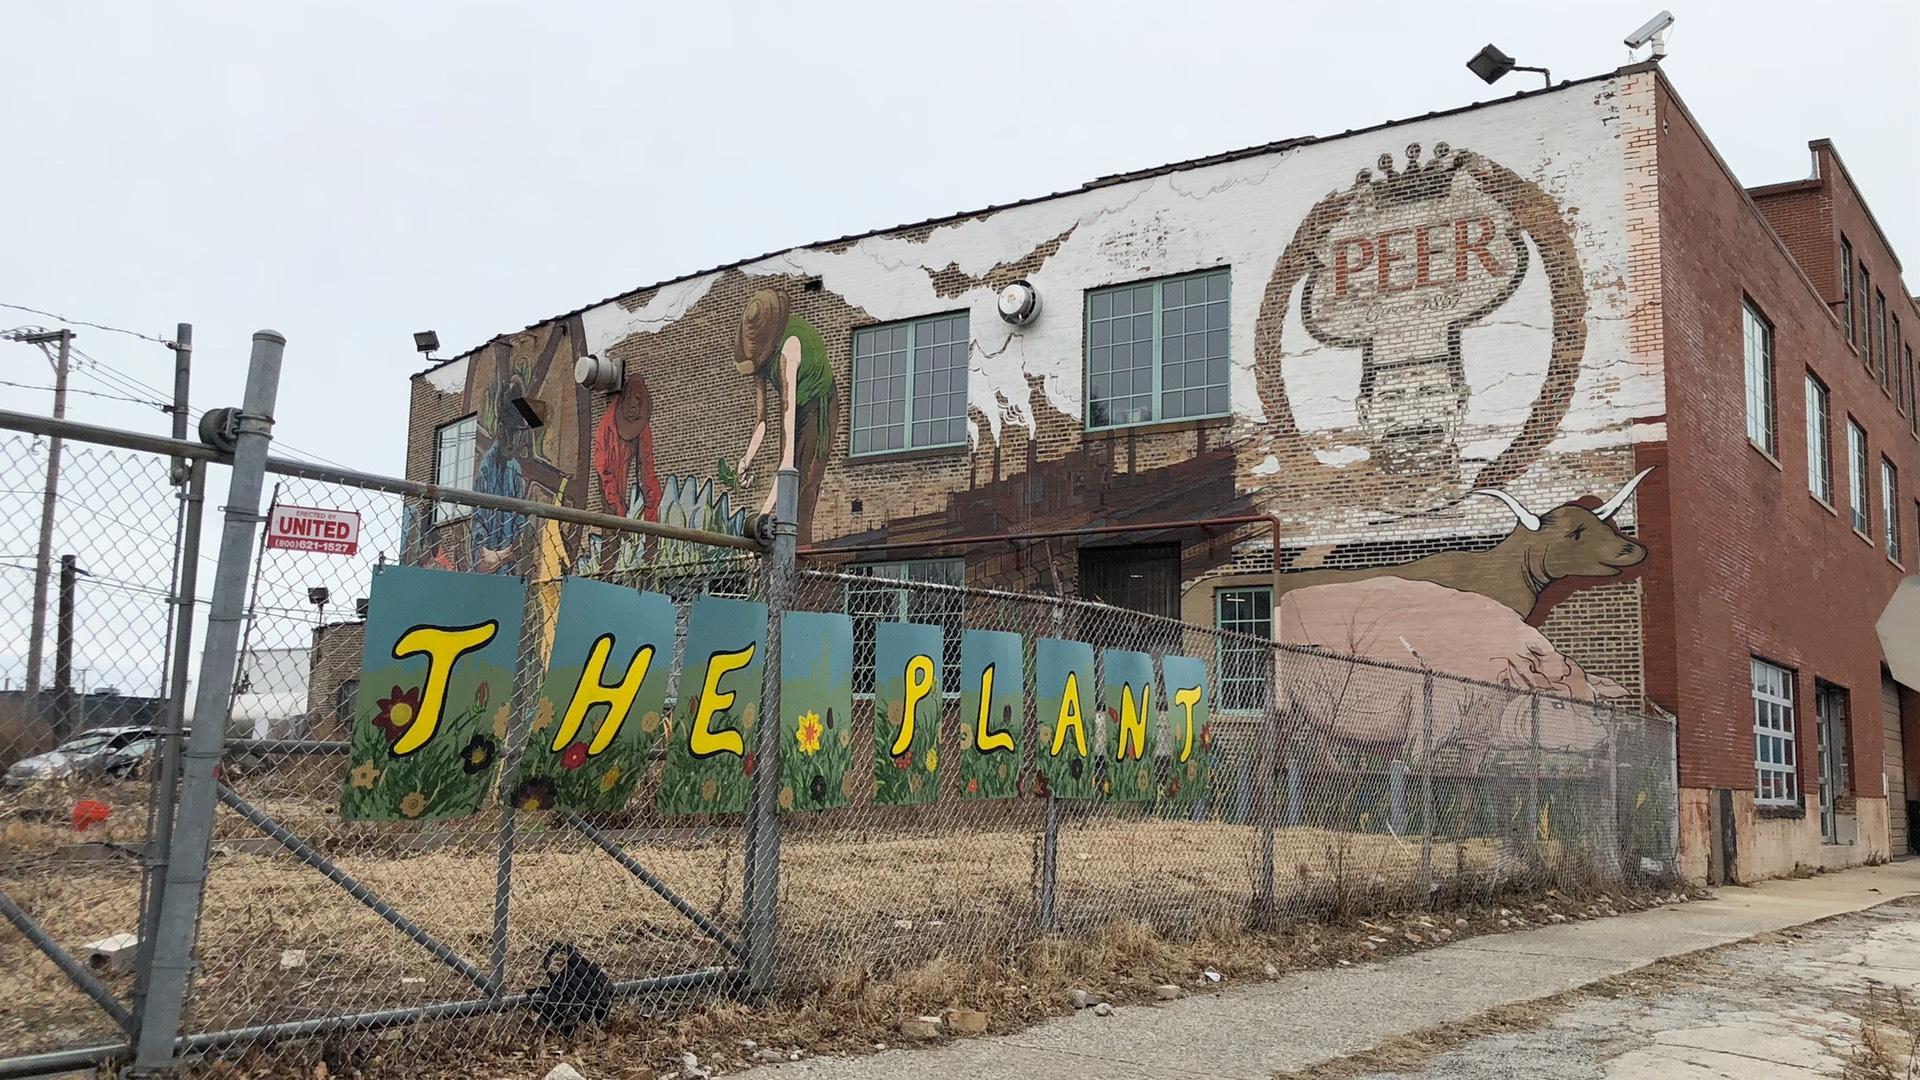 The Plant used to be Peer Foods, a meat processing facility. (Patty Wetli / WTTW News)